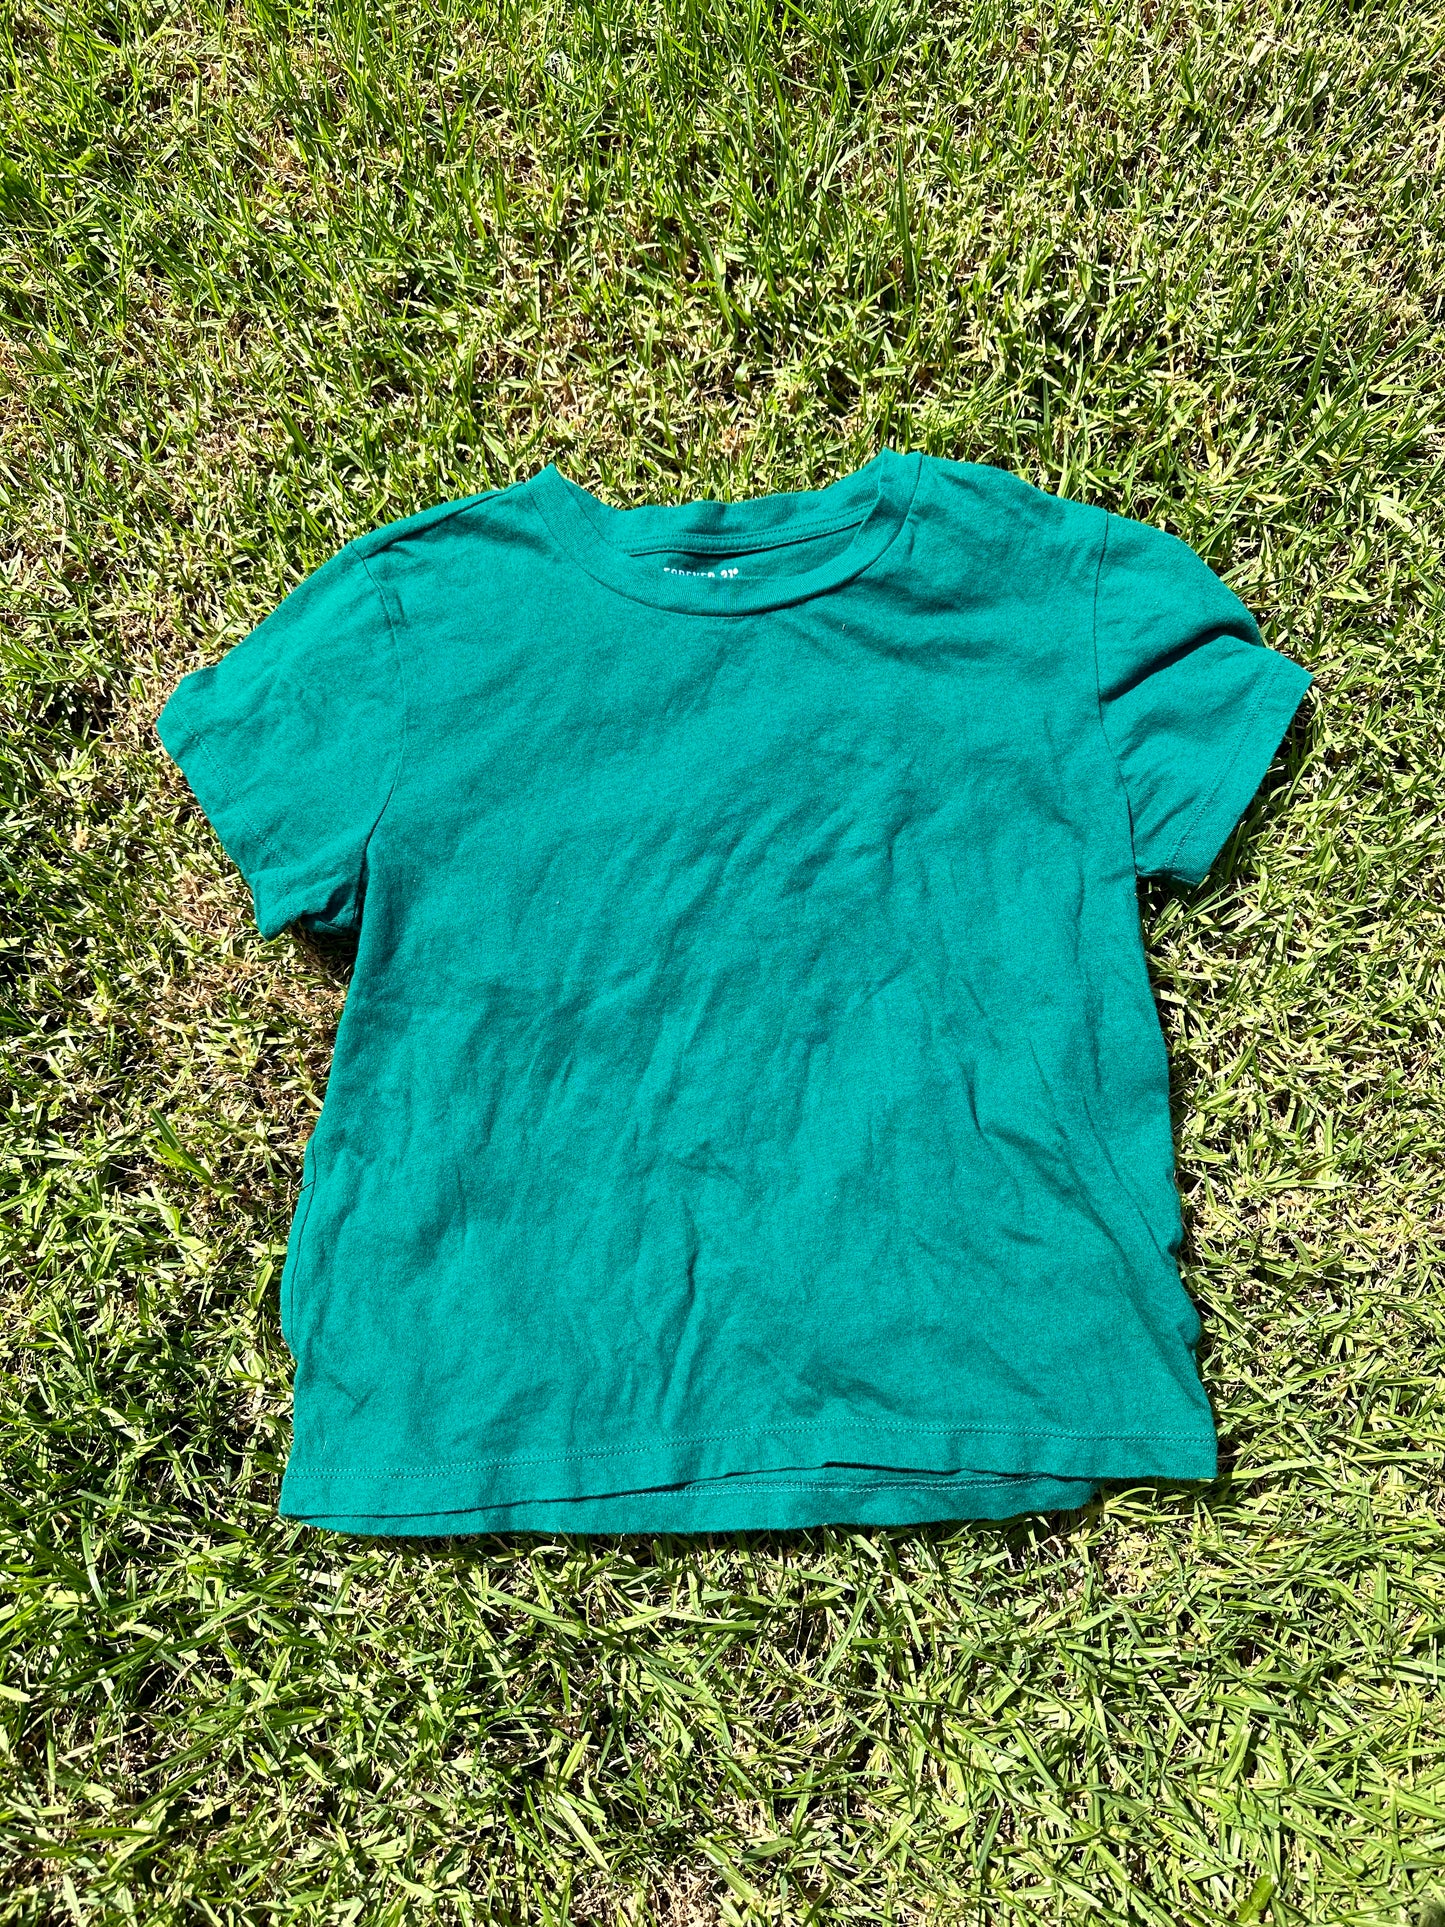 NEW GIRL: Cece's Comfy Color Tees